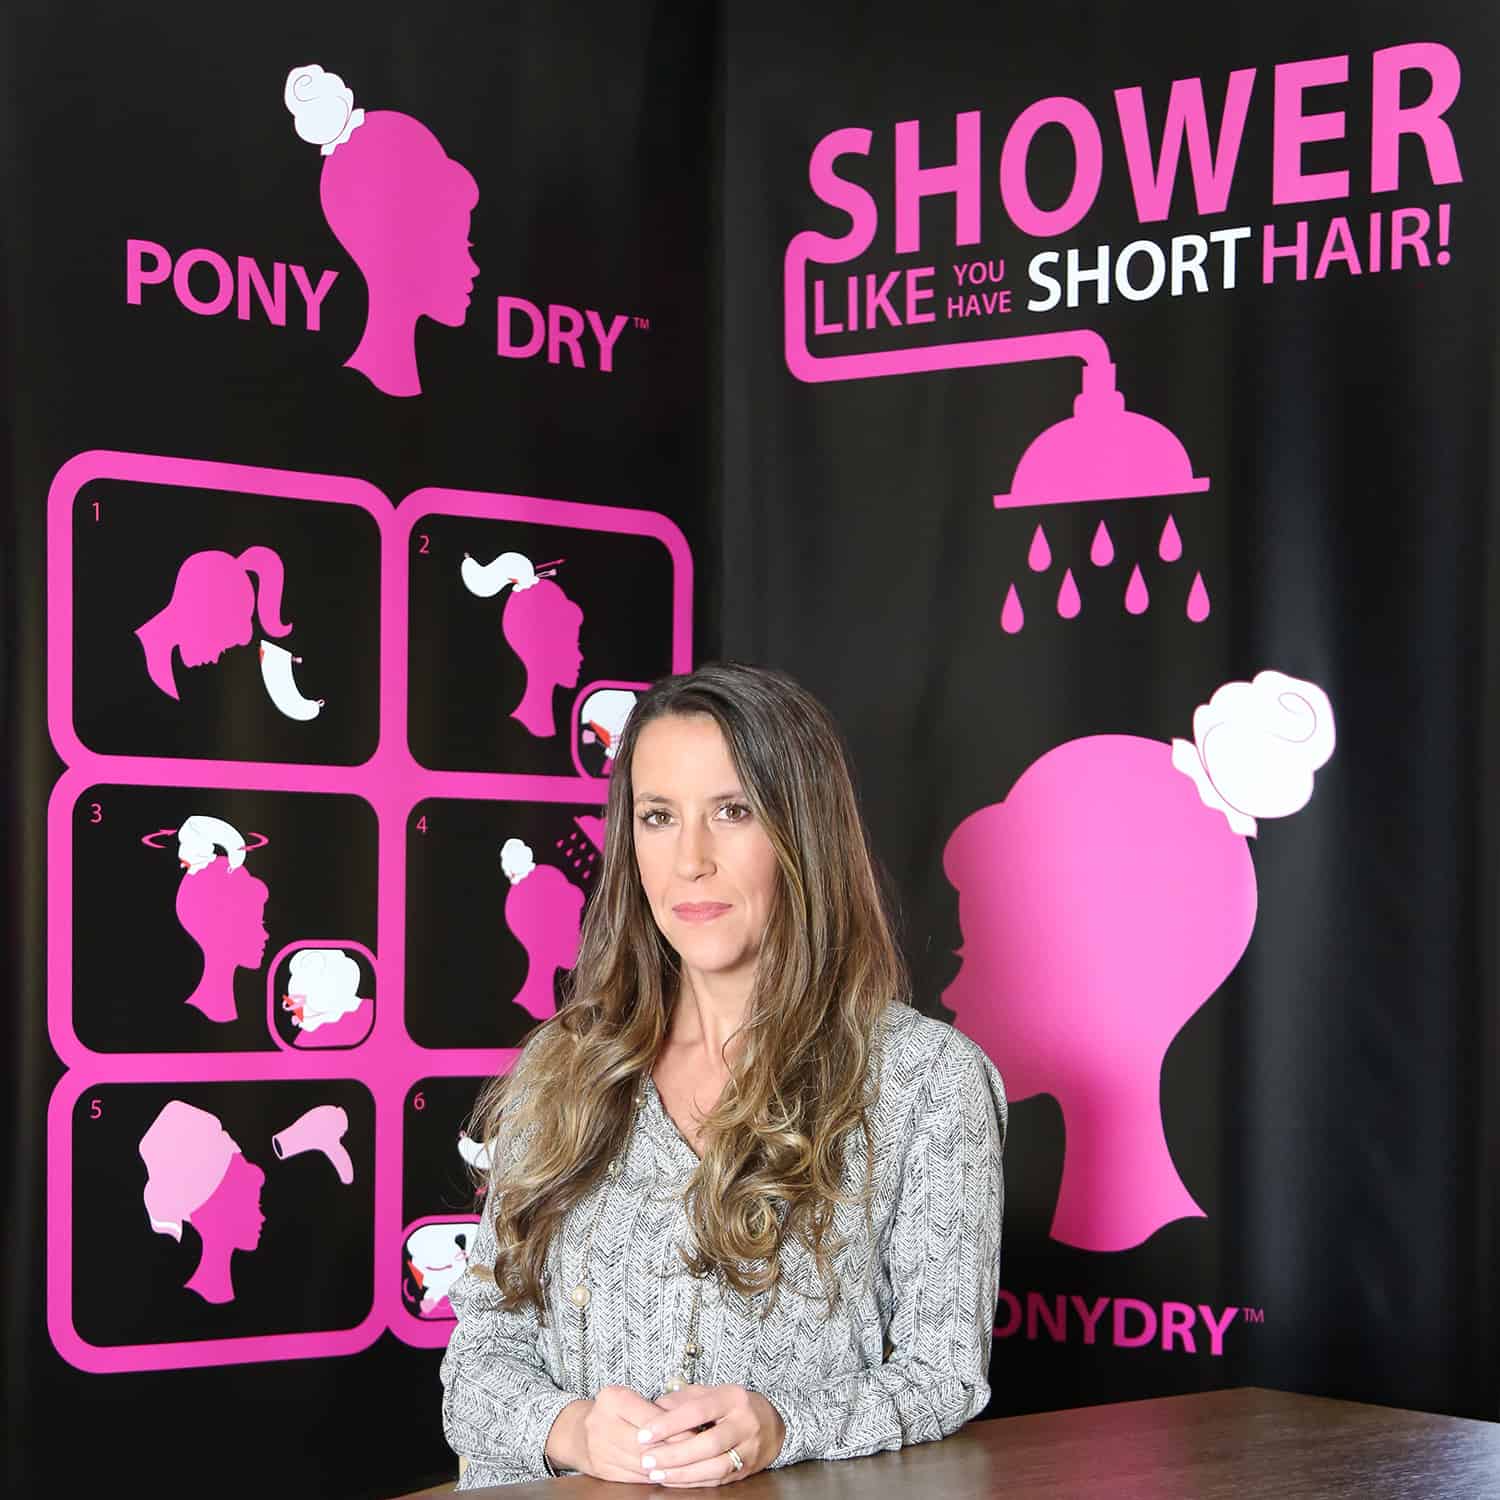 Toronto based entrepreneur and mother, Jessica Watson launched the PonyDry in 2015. Created for women with long hair that love their length but hate how long it takes to wash and style, the PonyDry cuts styling time from 25 minutes to 7 minutes flat.